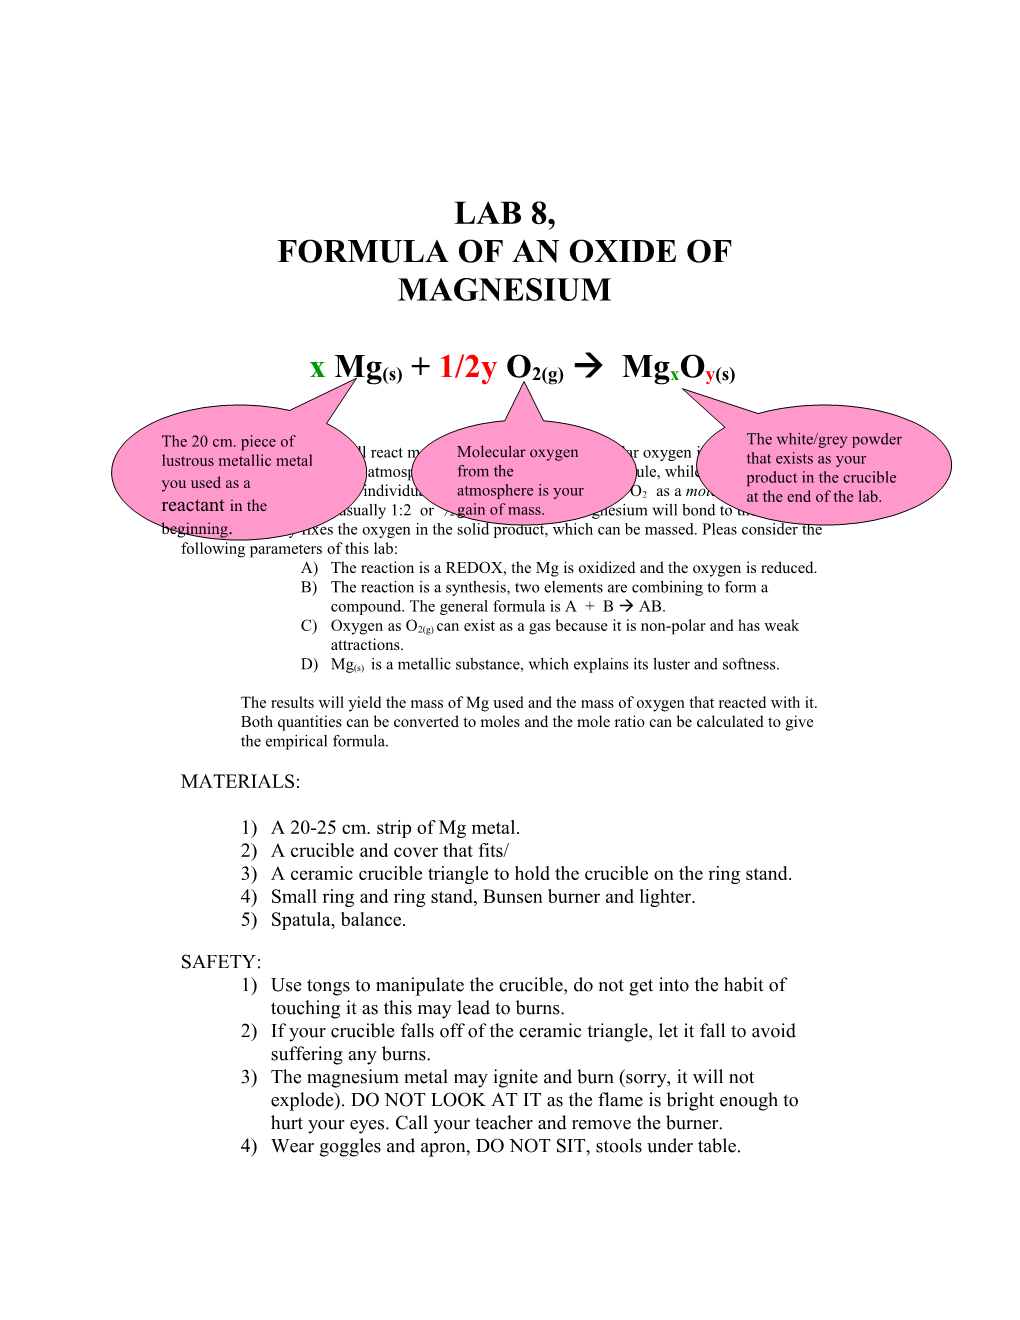 Formula of an Oxide of Magnesium